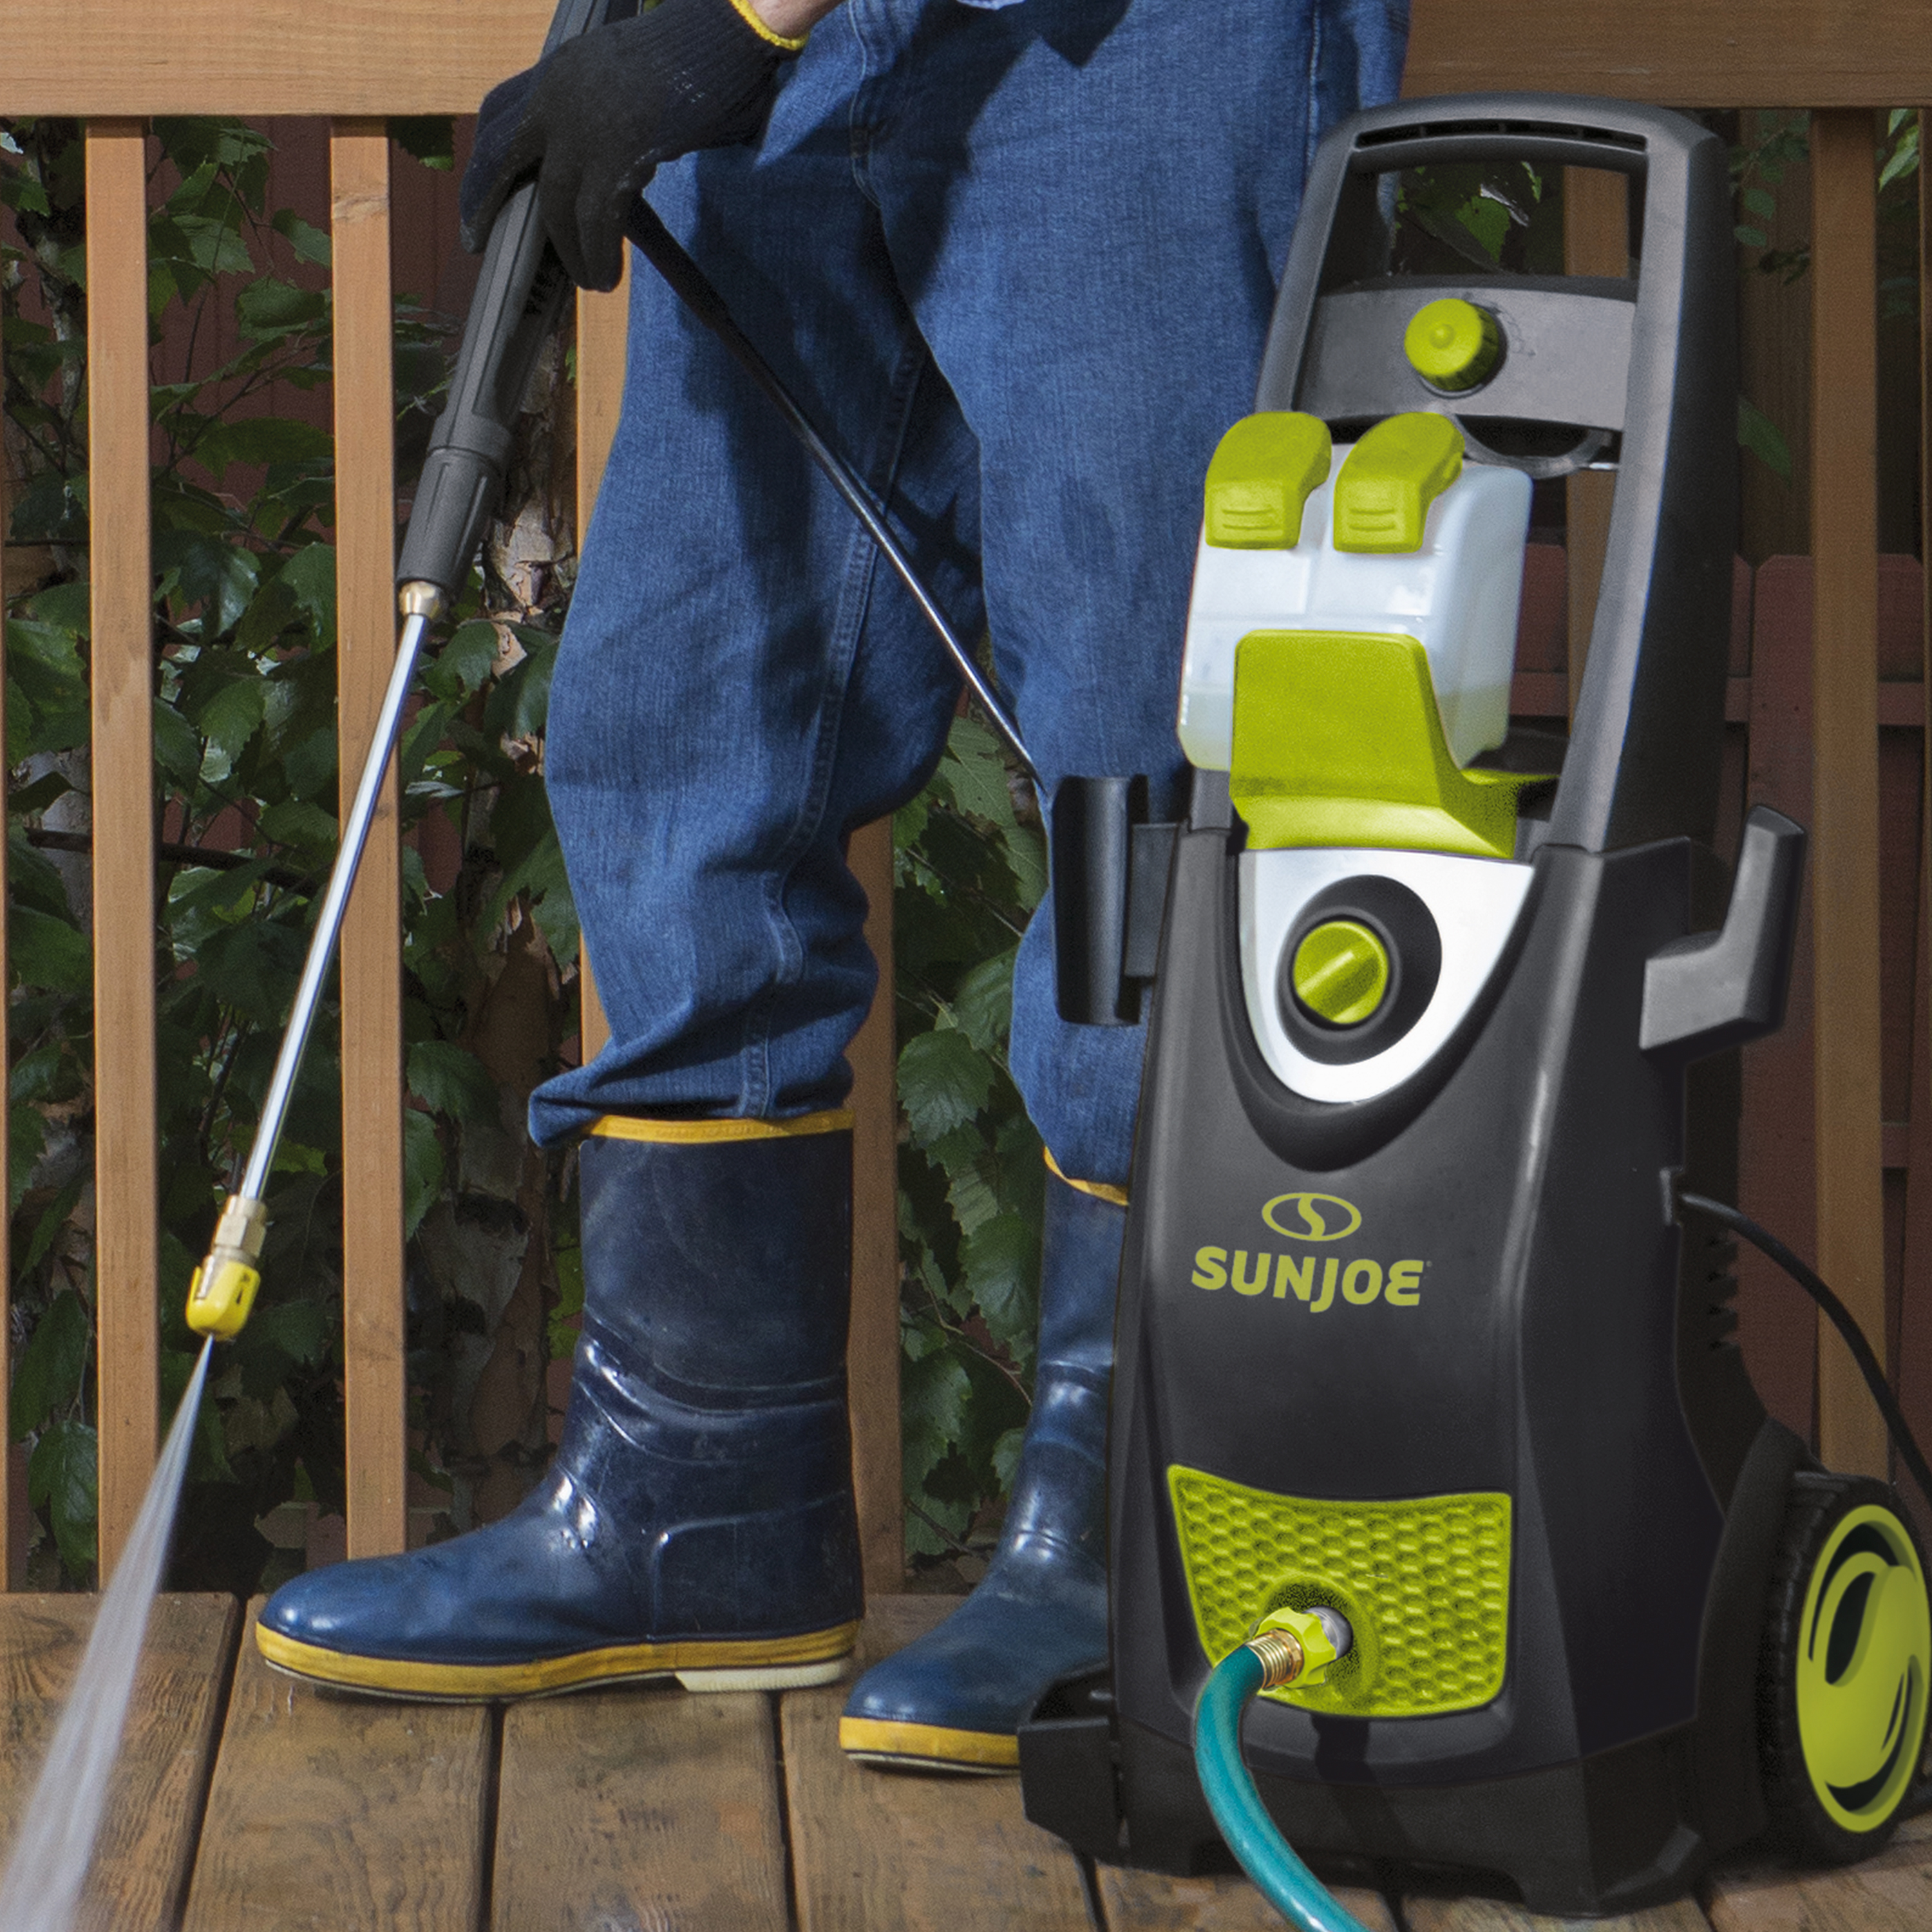 Sun Joe High Performance Electric Pressure Washer with Quick-Connect Tips, 14.5-Amp, Brushless Induction Motor - image 5 of 19